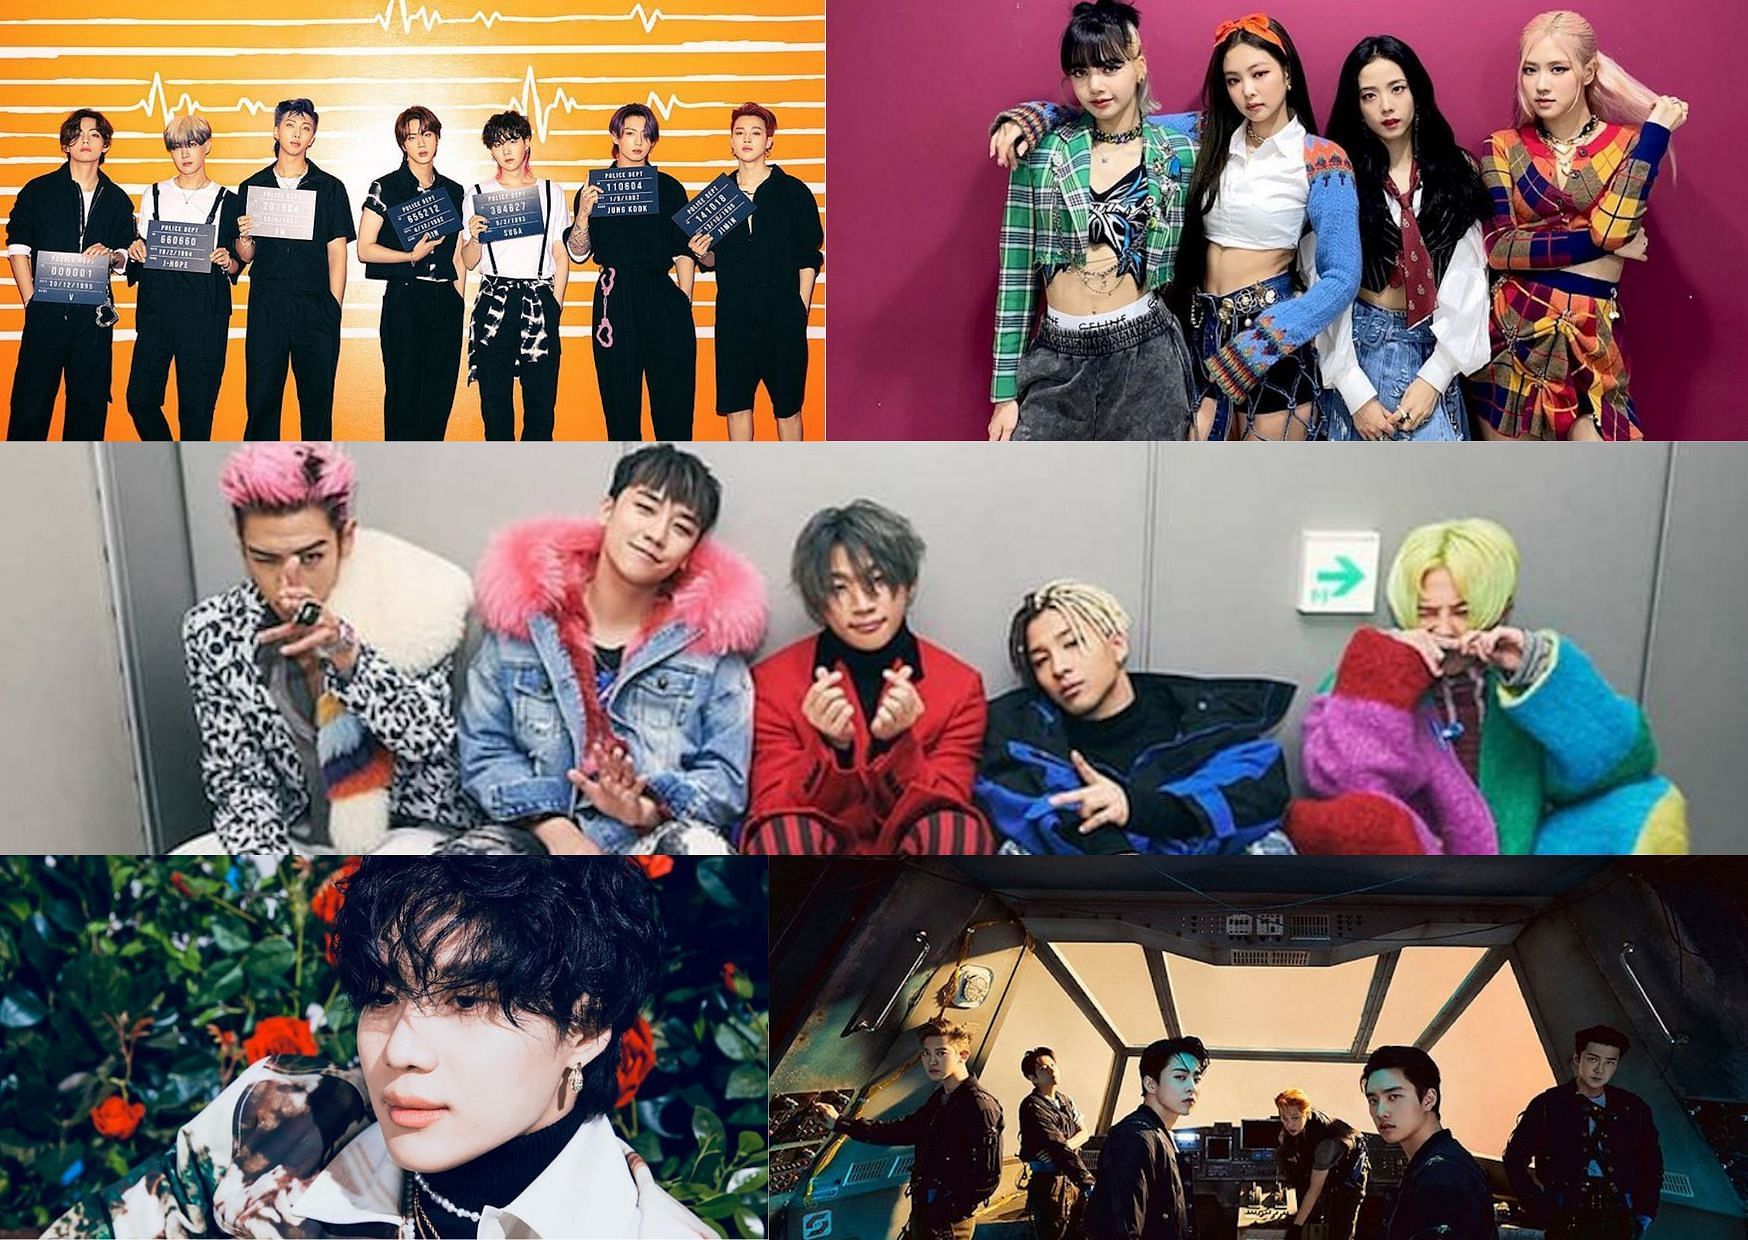 Top 5 KPop Artists to get you into the genre